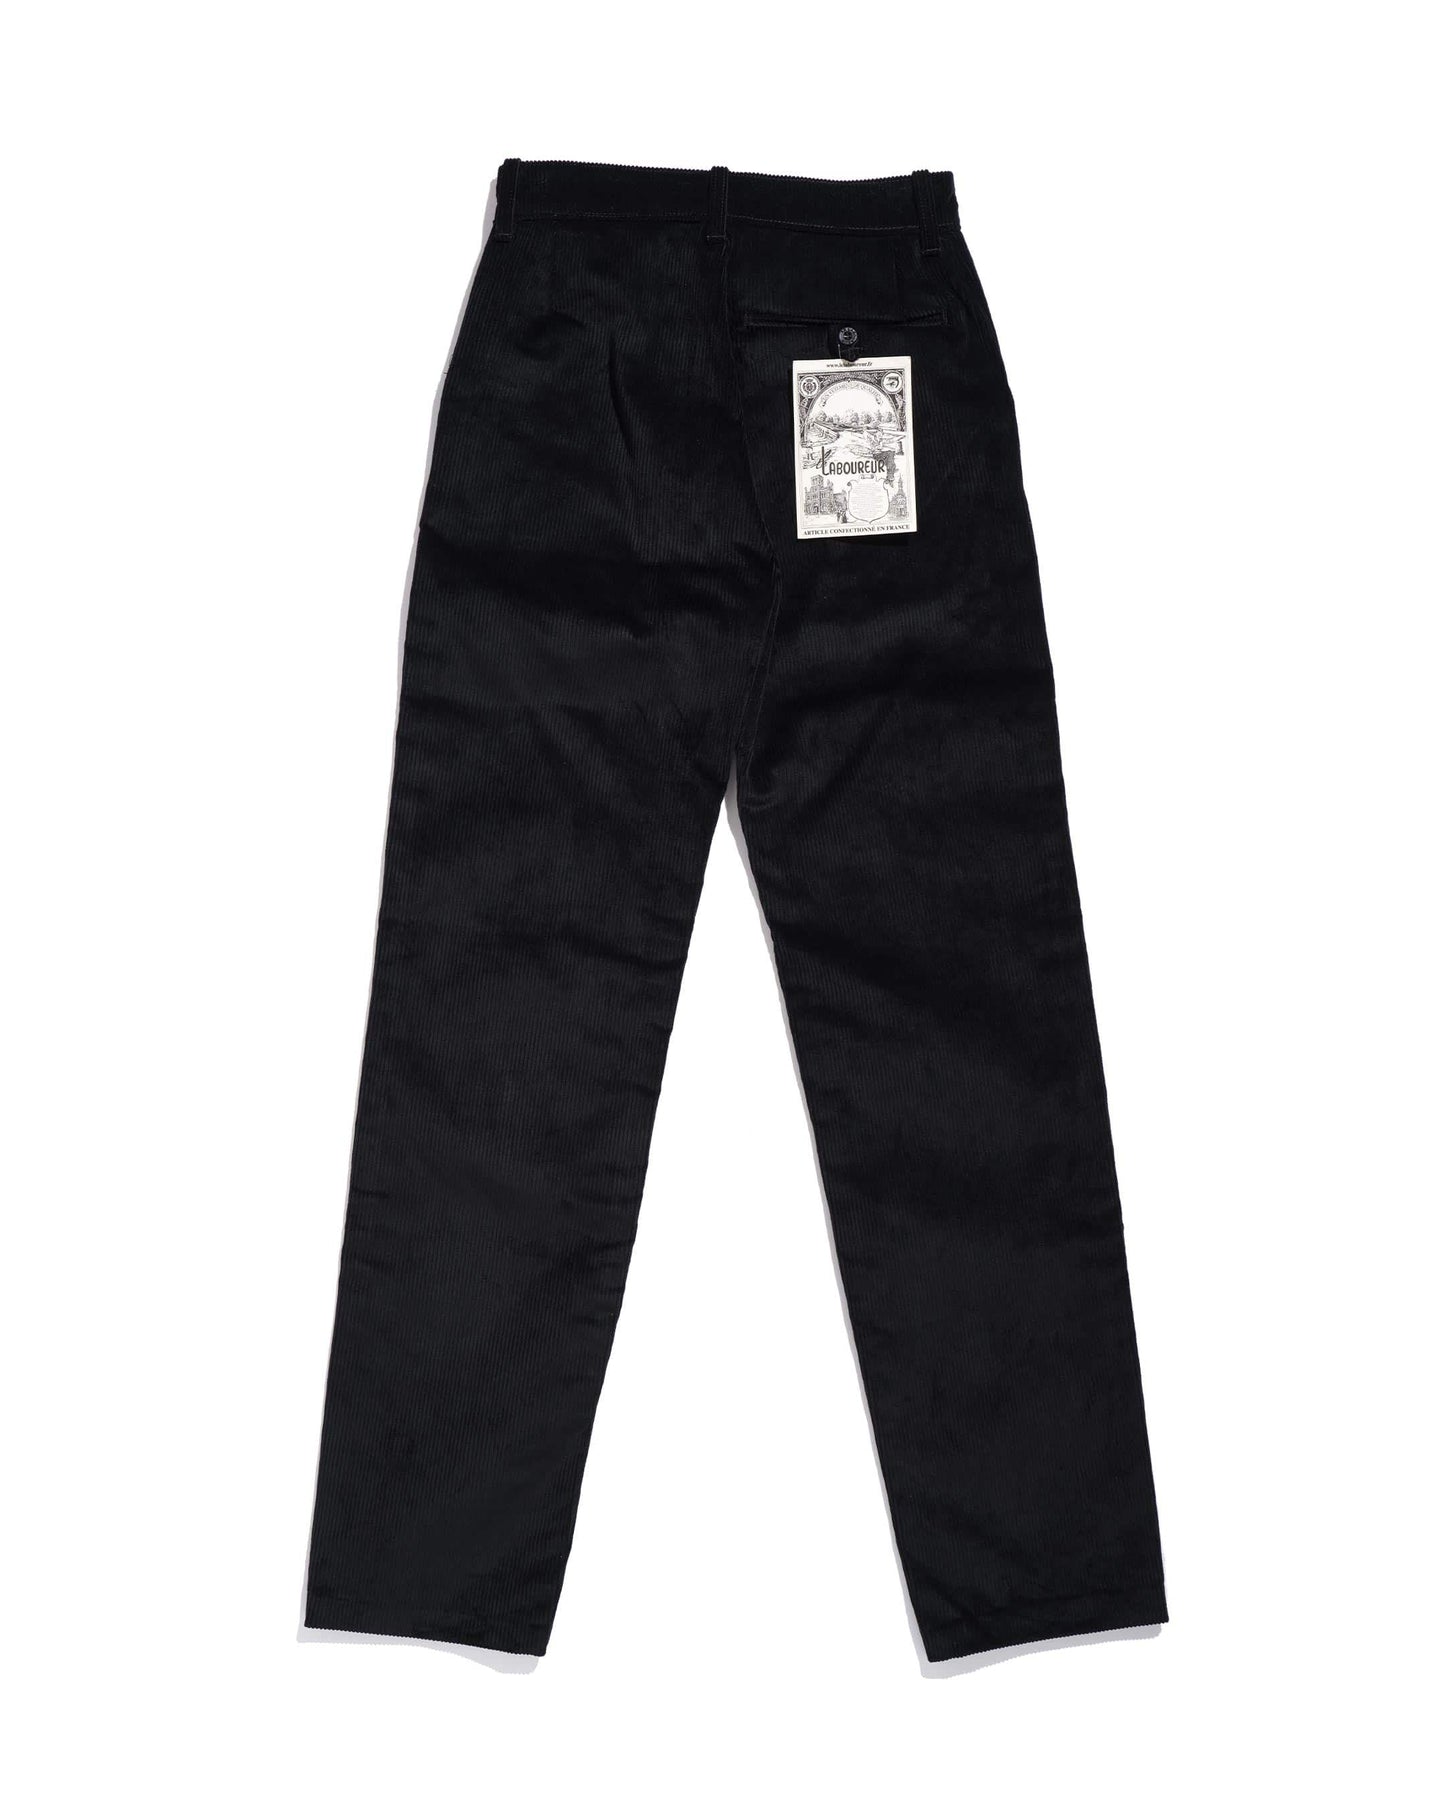 Straight black corduroy pants (discounted size 36)